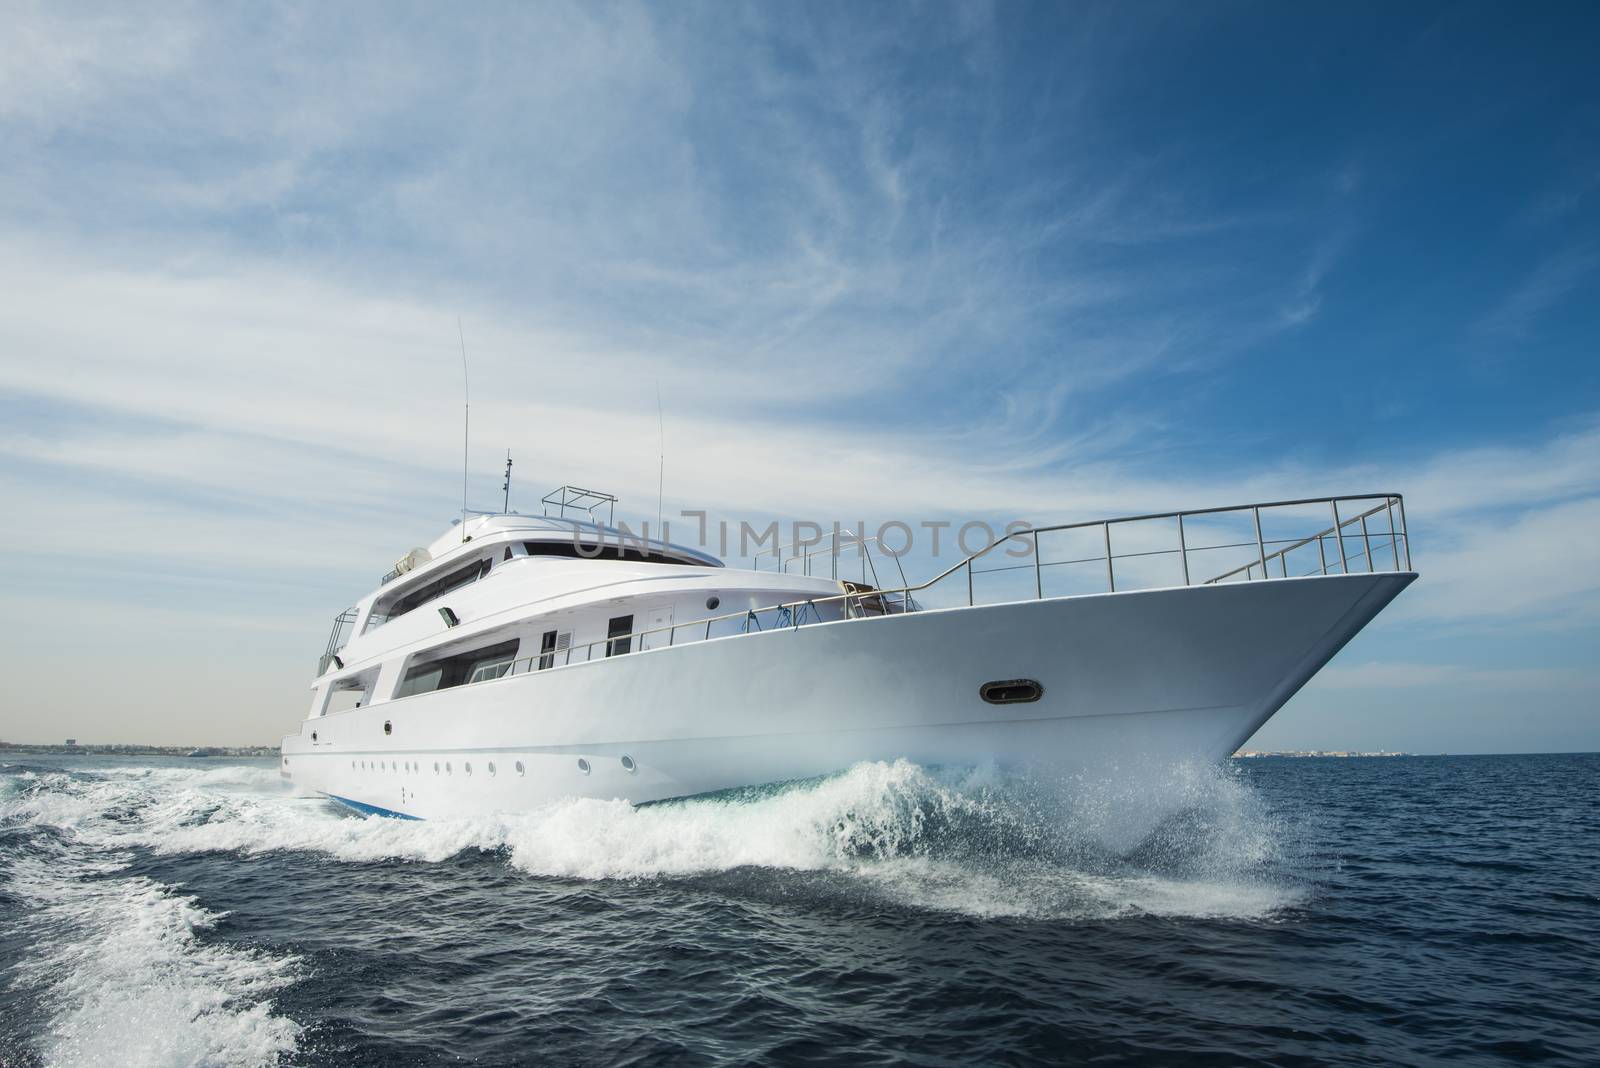 A luxury private motor yacht under way on tropical sea with bow wave